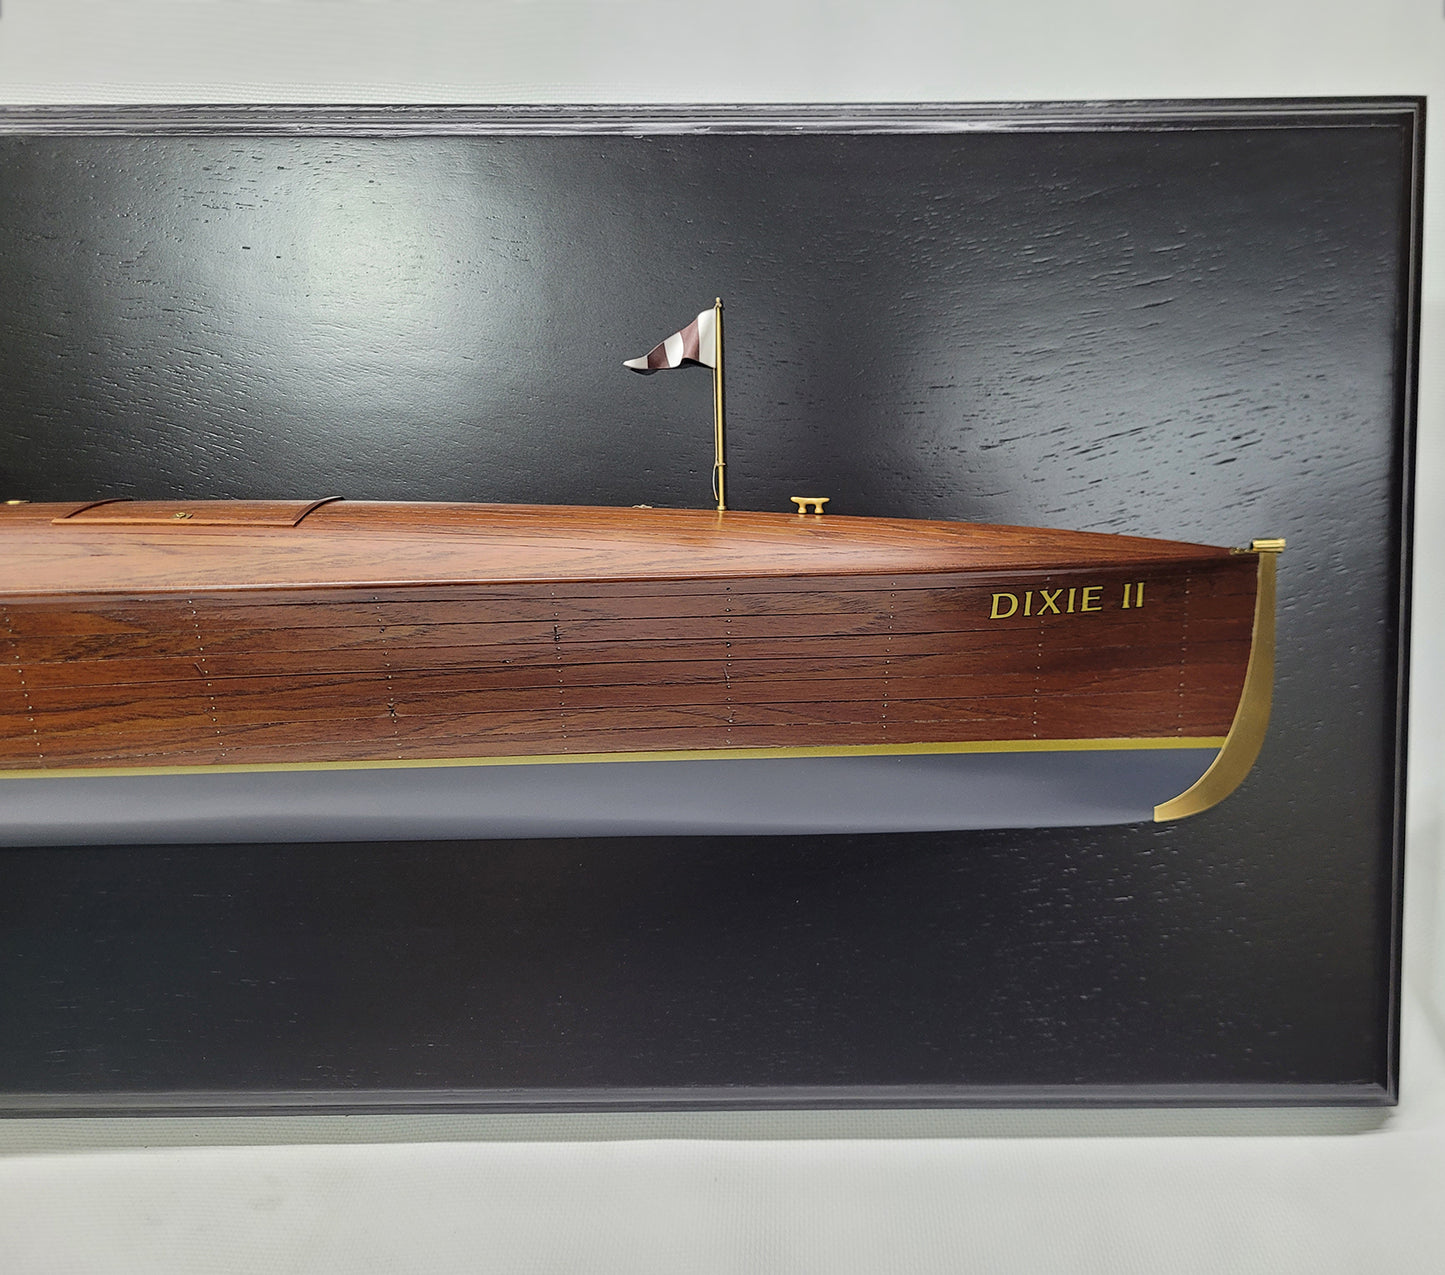 Half Model of the Gold Cup Racer DIXIE II - Lannan Gallery